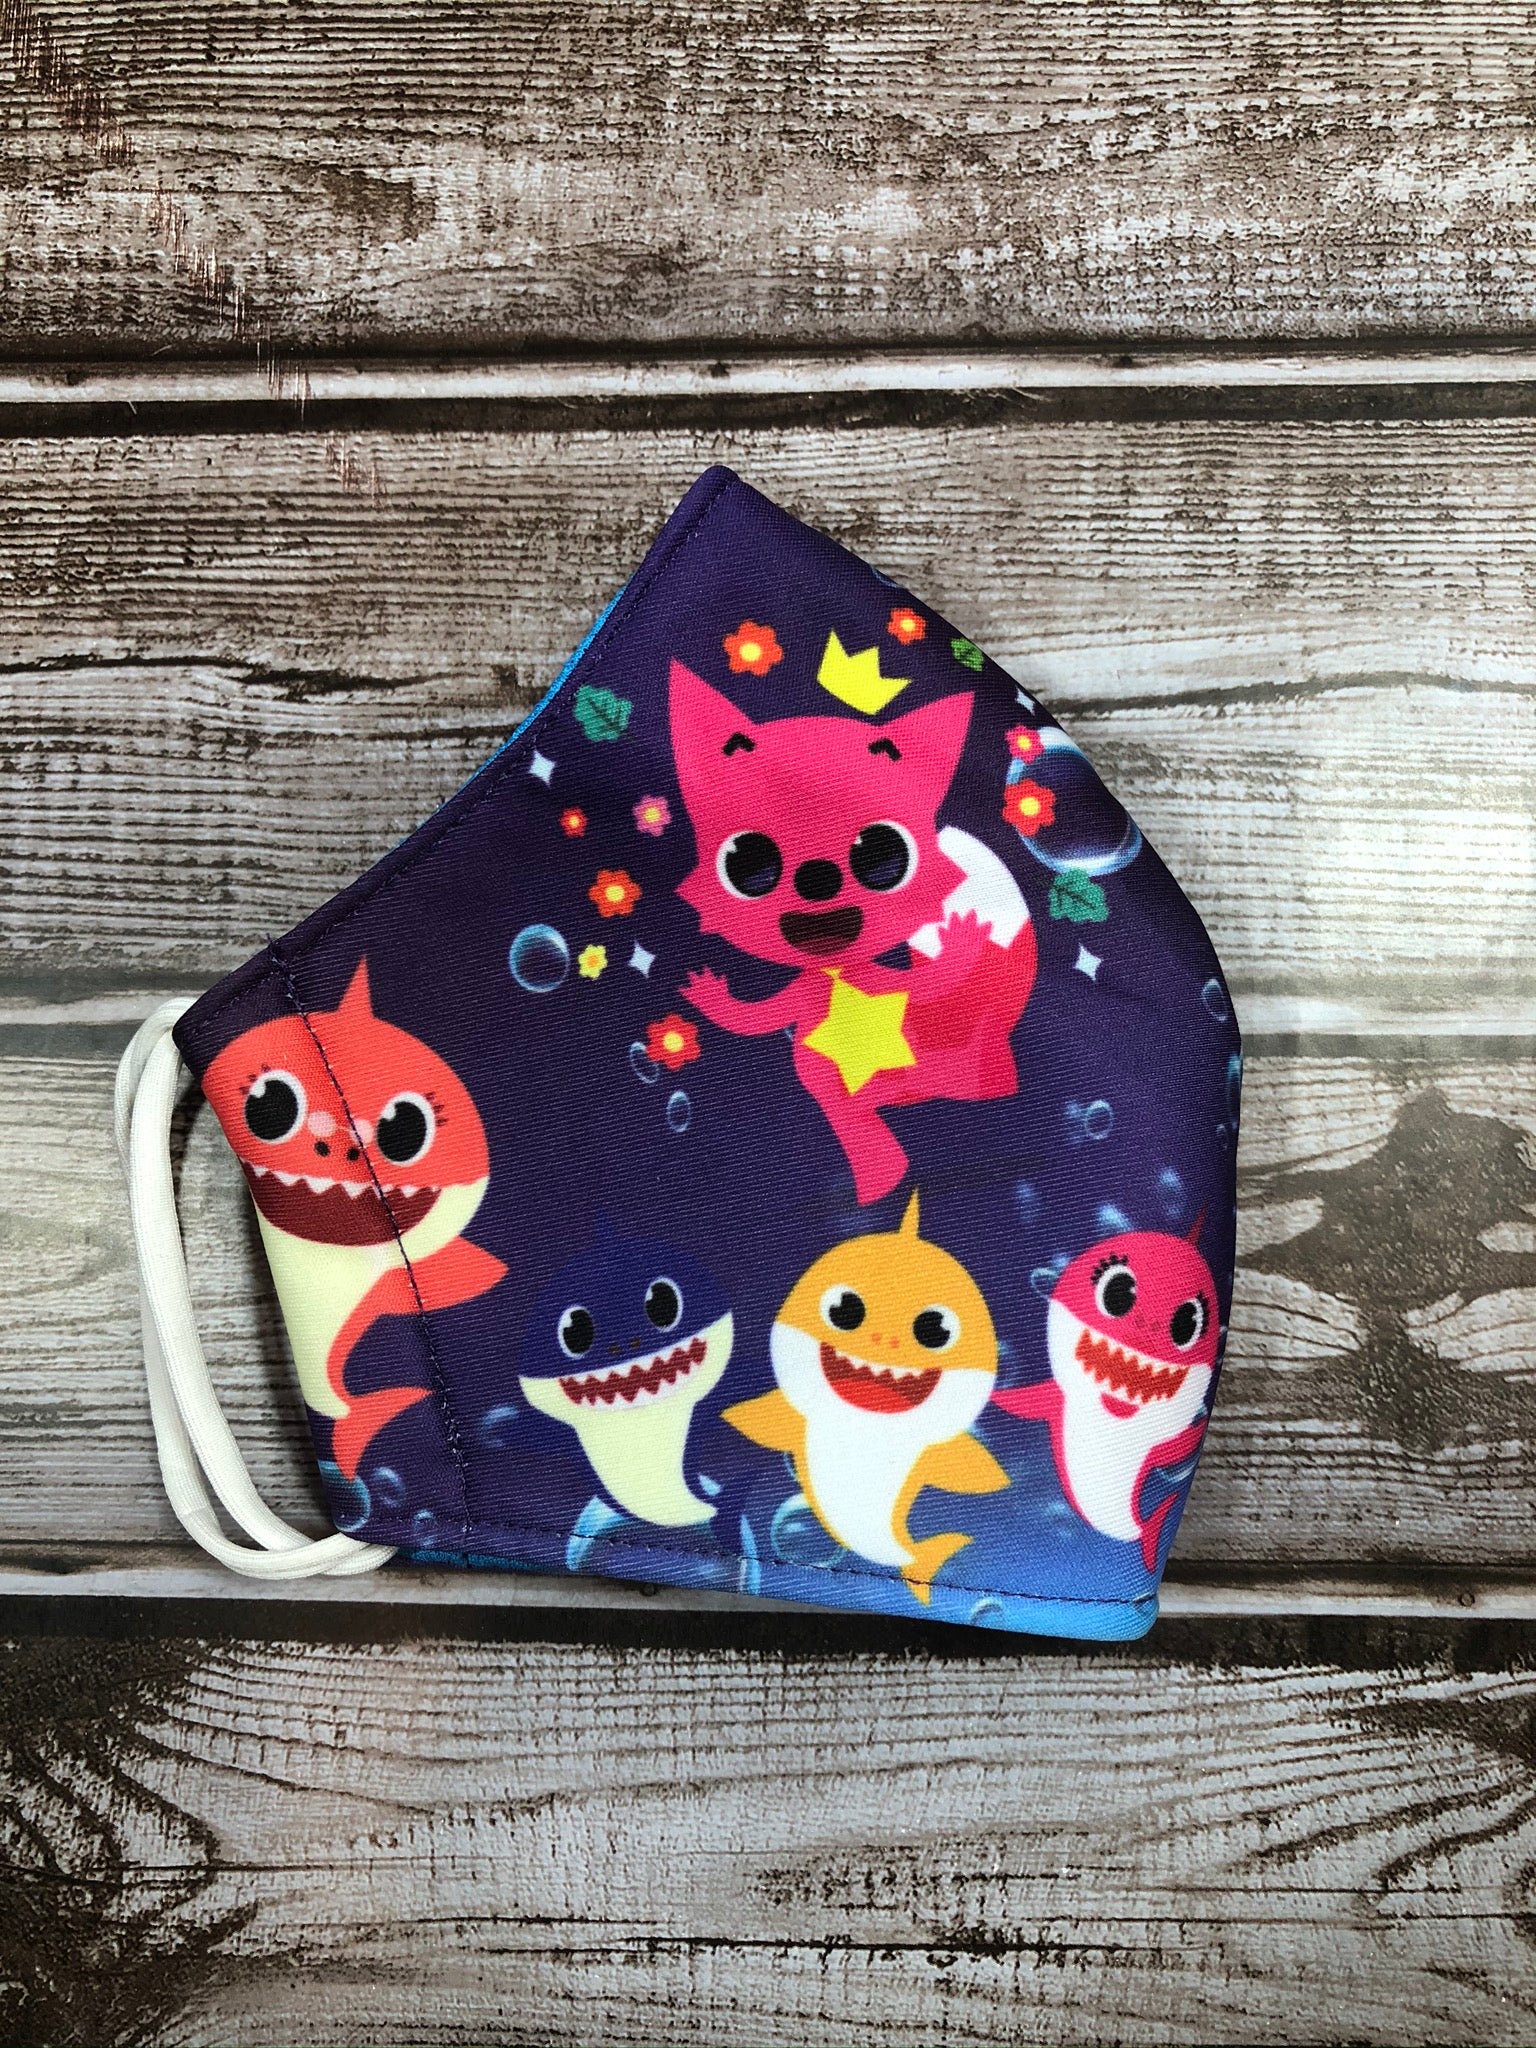 Pinkfong Baby sharks face mask for 7 years old and up to teen